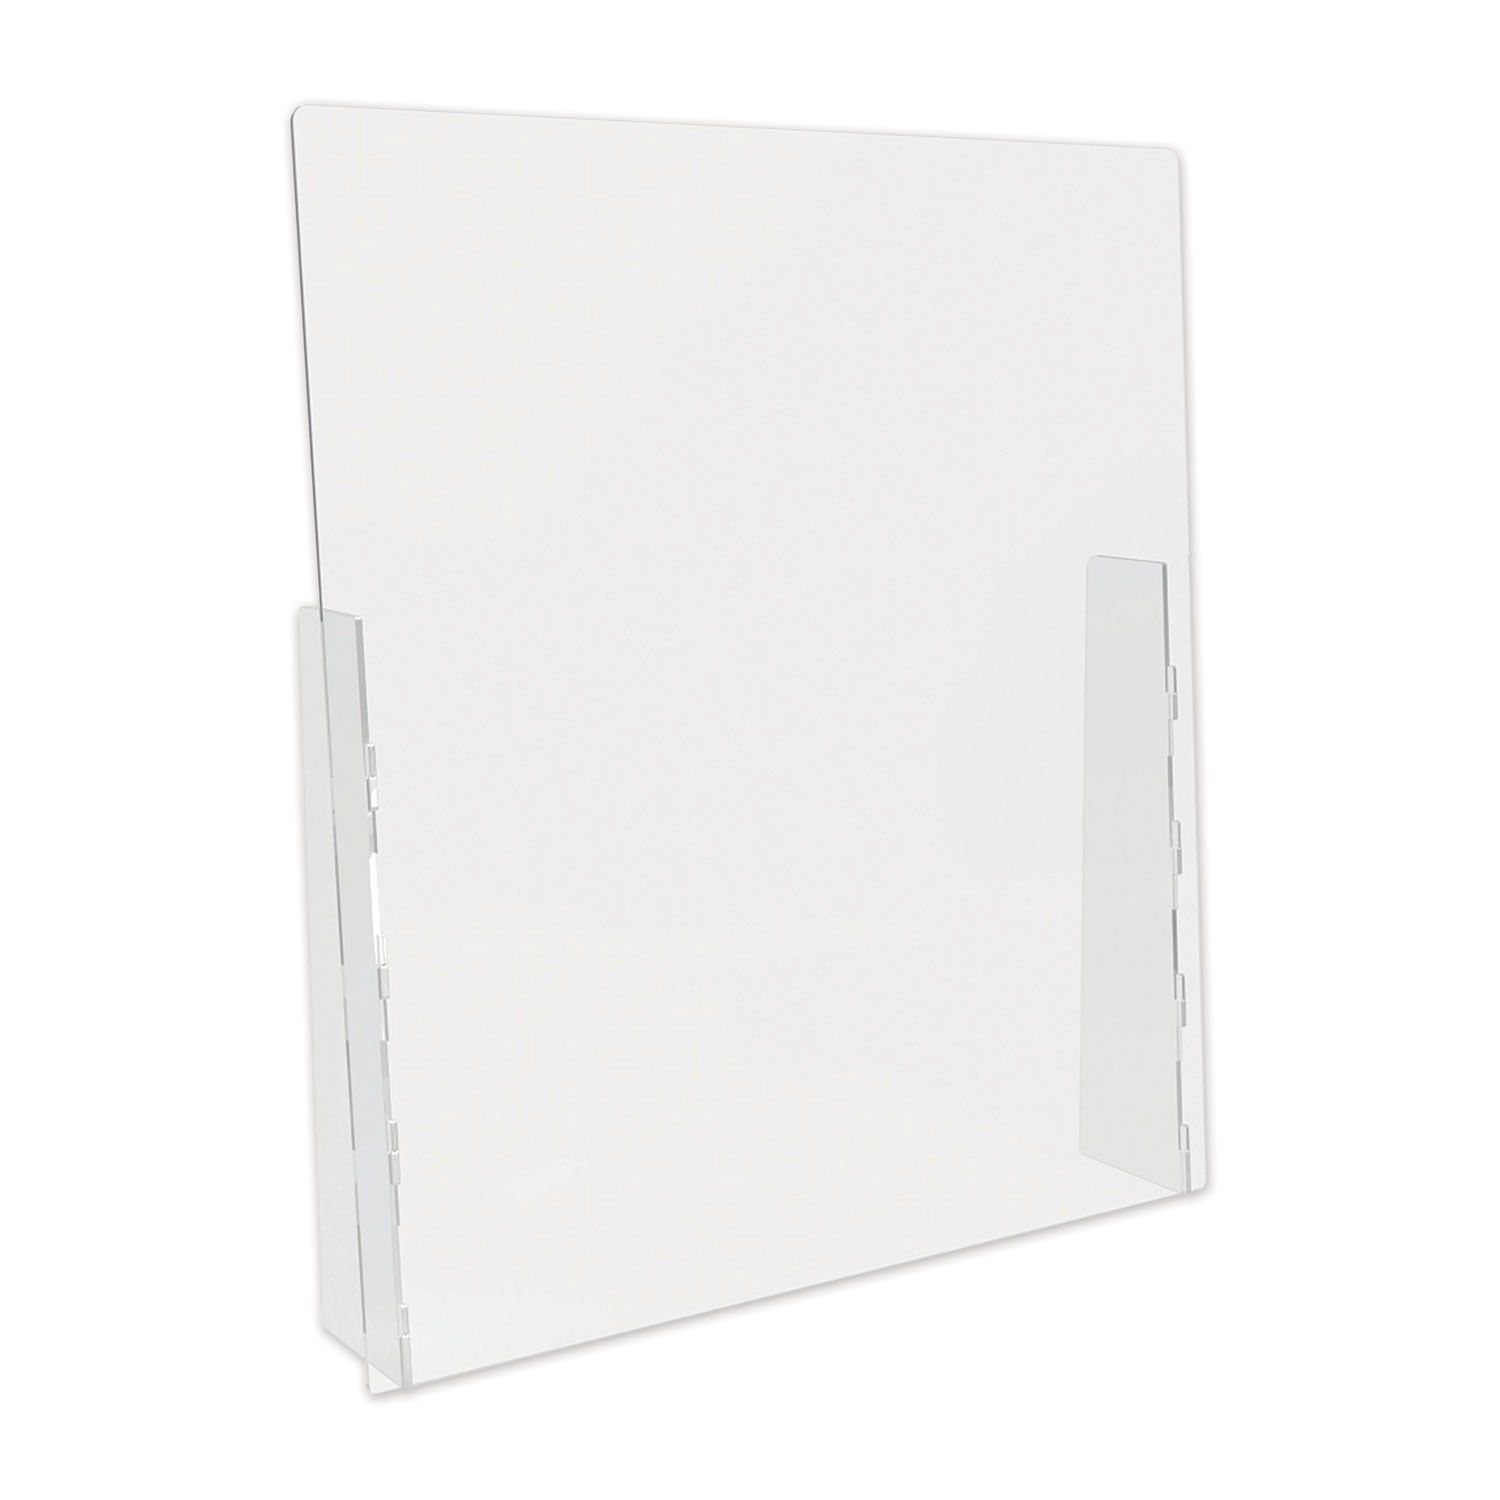 counter-top-barrier-with-full-shield-3175-x-6-x-36-acrylic-clear-2-carton_defpbcta3136f - 1